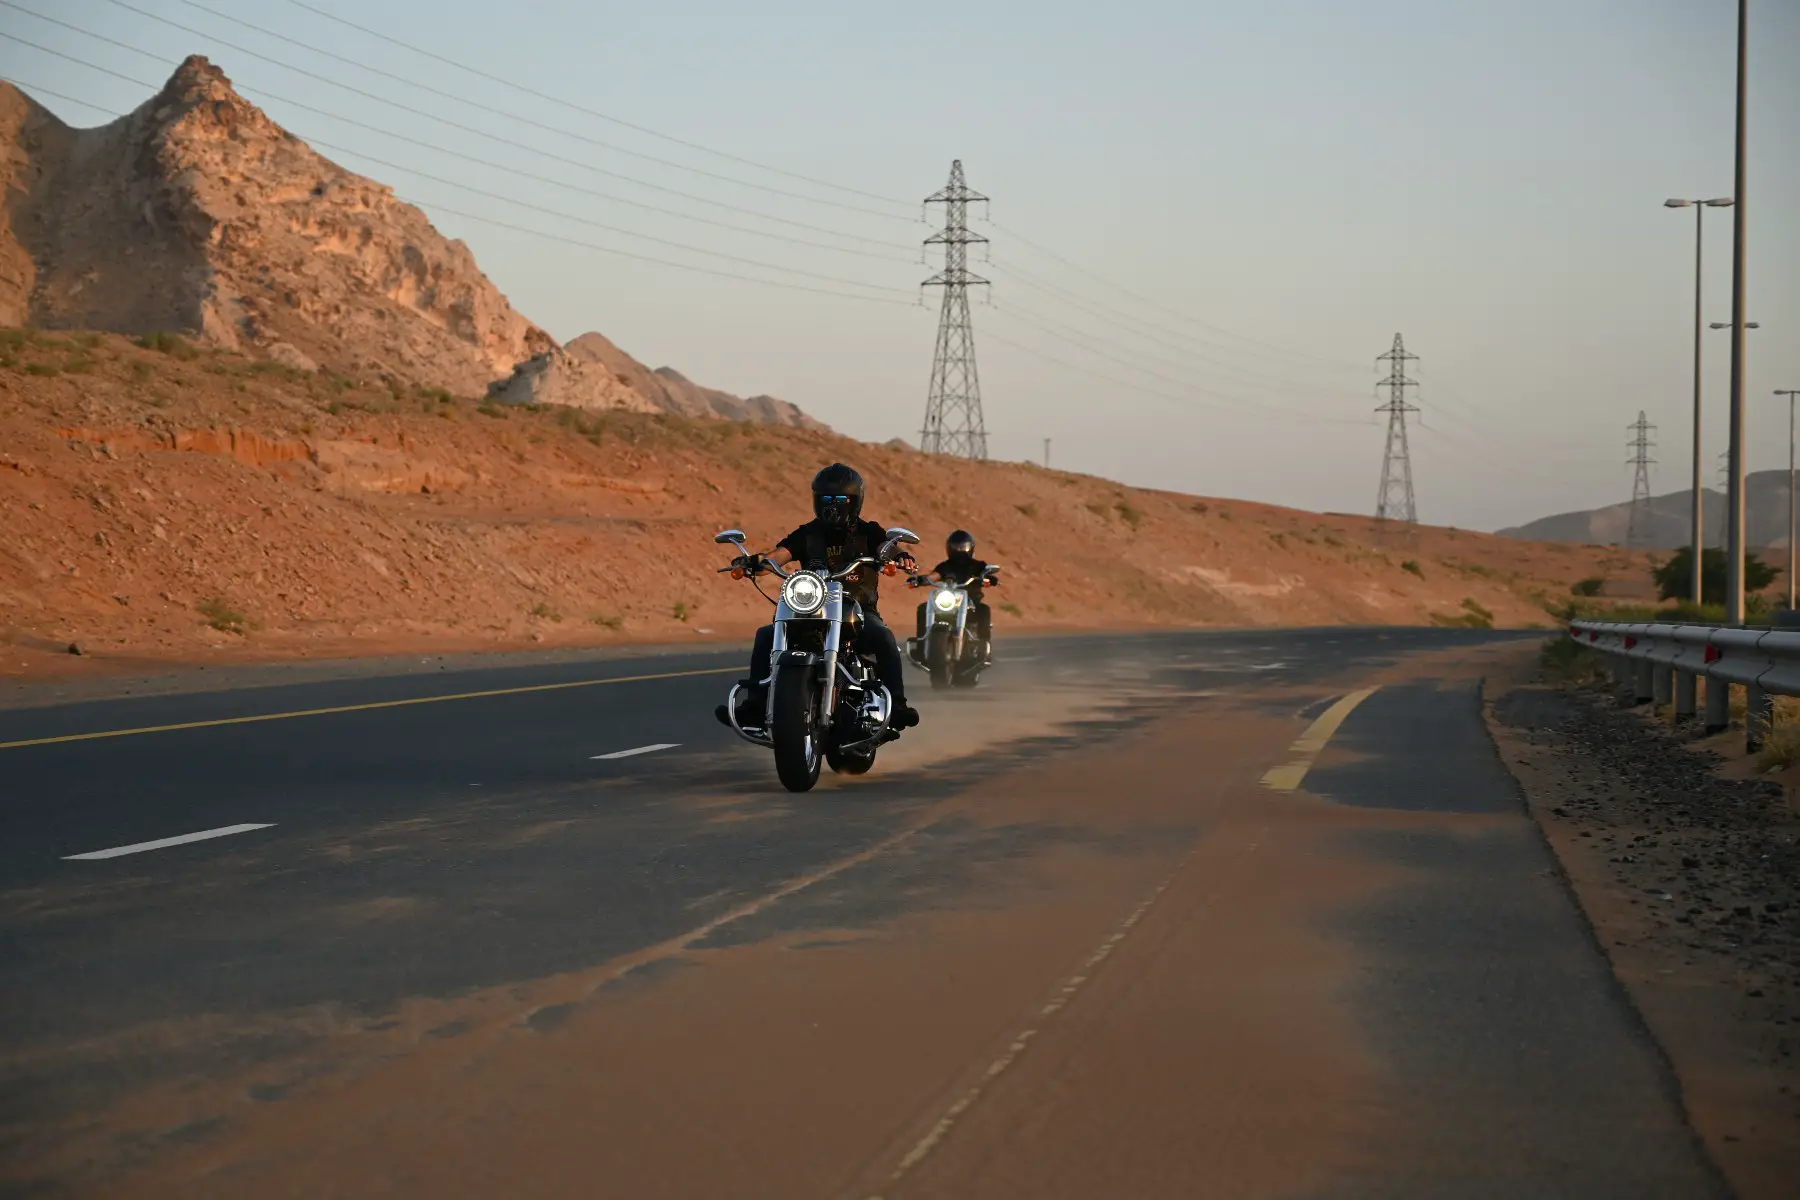 Two motorcyclists driving on a highway in the UAE.